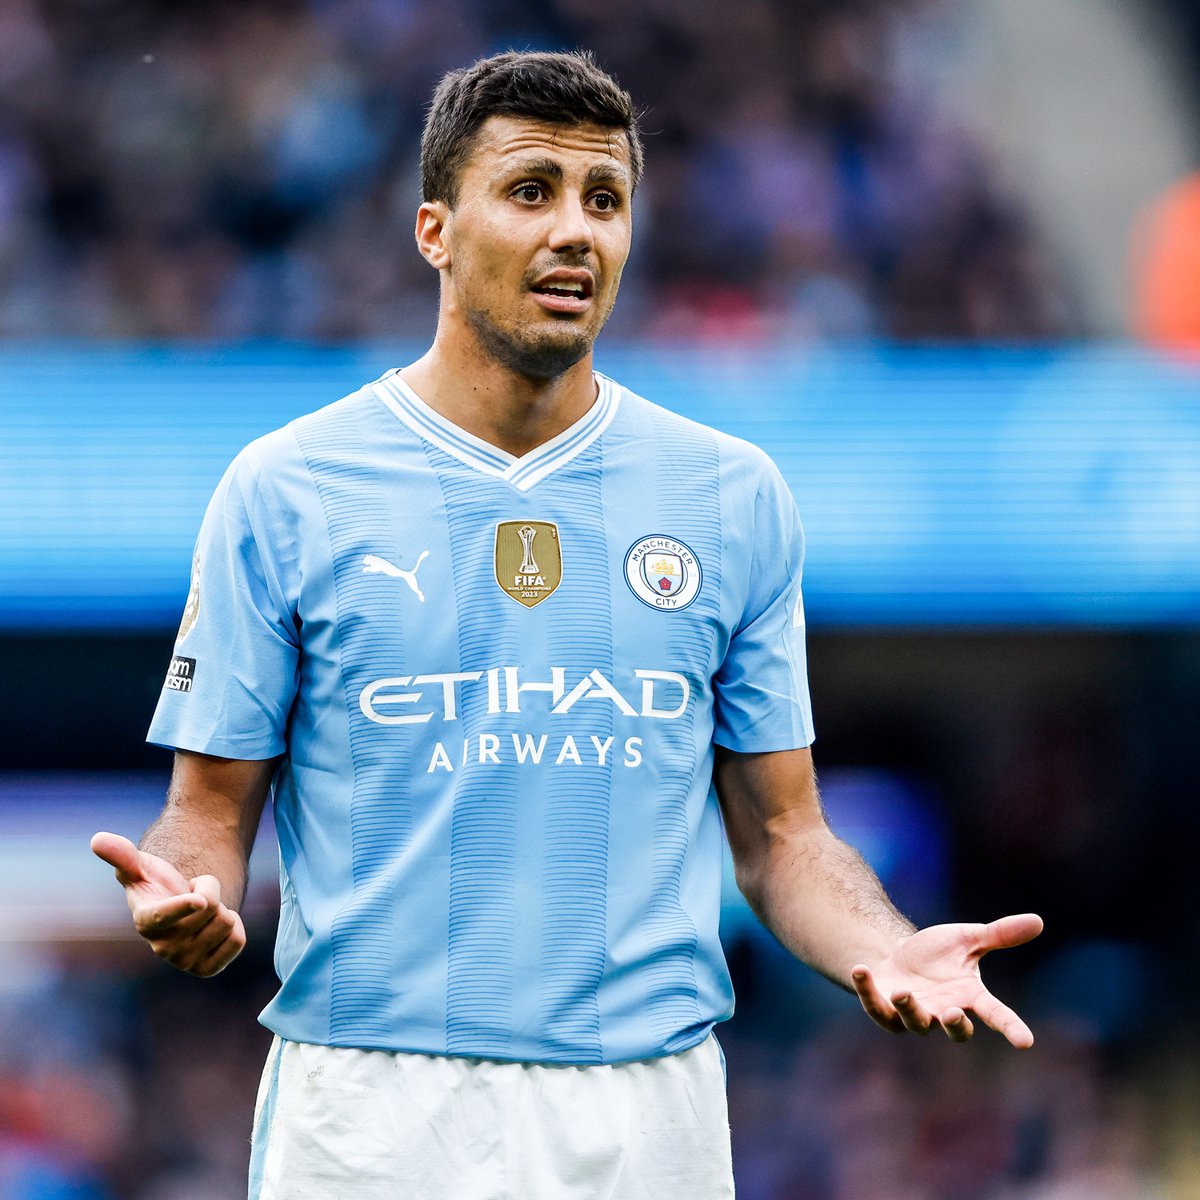 Rodri has seven goals and nine assists while being unbeaten in the Premier League this season. No POTS nomination though 🤷‍♂️